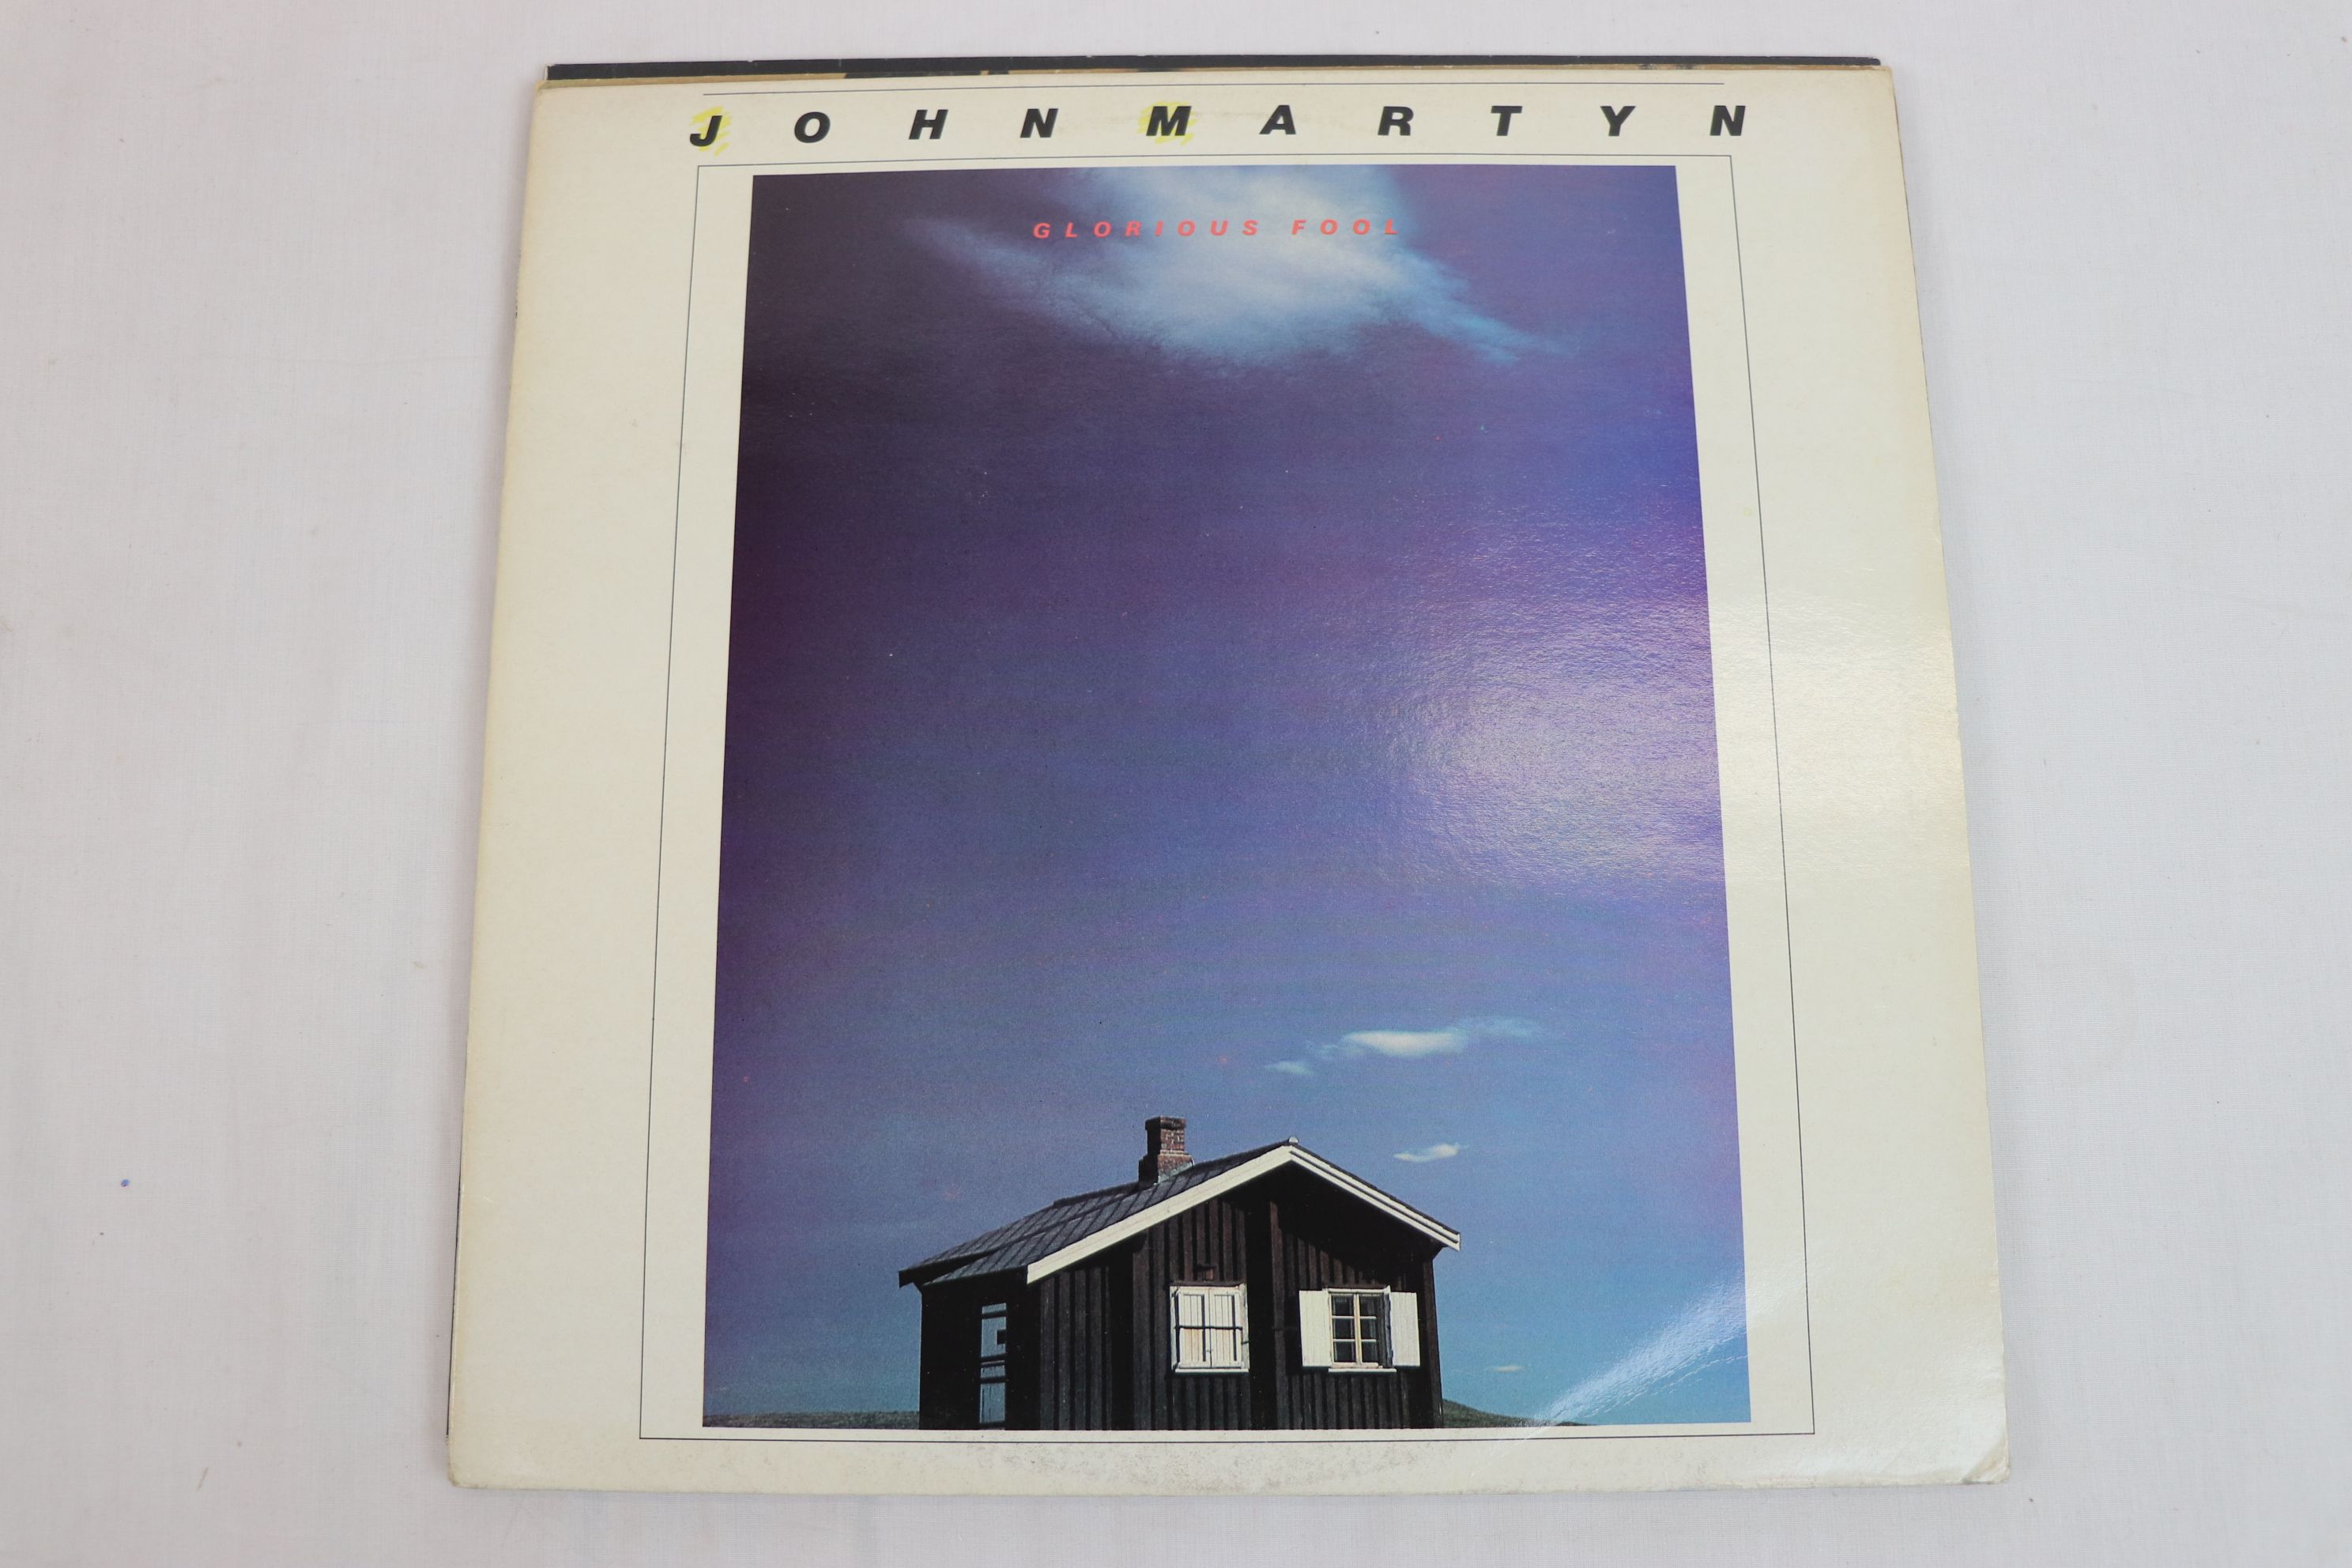 Vinyl - Six John Martyn LPs to include Solid Air, Inside Out, Sundays Child, Glorious Fool, Bless - Image 6 of 8